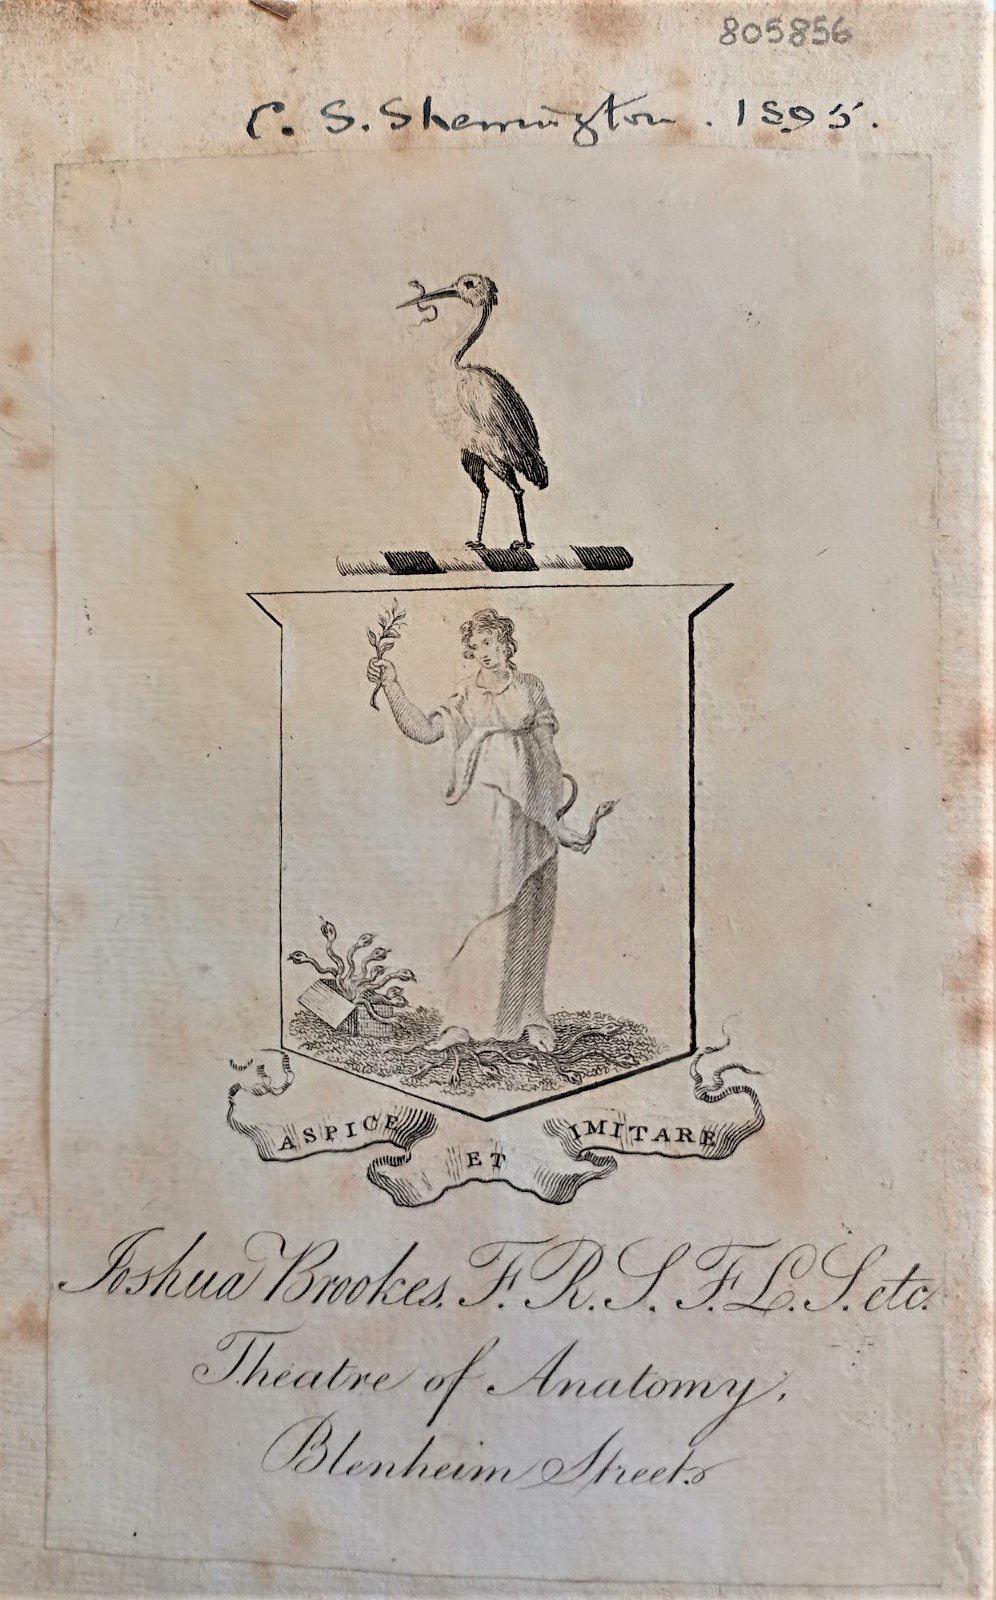 A bookplate showing the the book once belonged to Joshua Brookes of the Theatre of Anatomy, Blenheim Streets. The bookplate depicts a figure holding a brang in one hand and a snake in the other, confronting a box of snakes. 